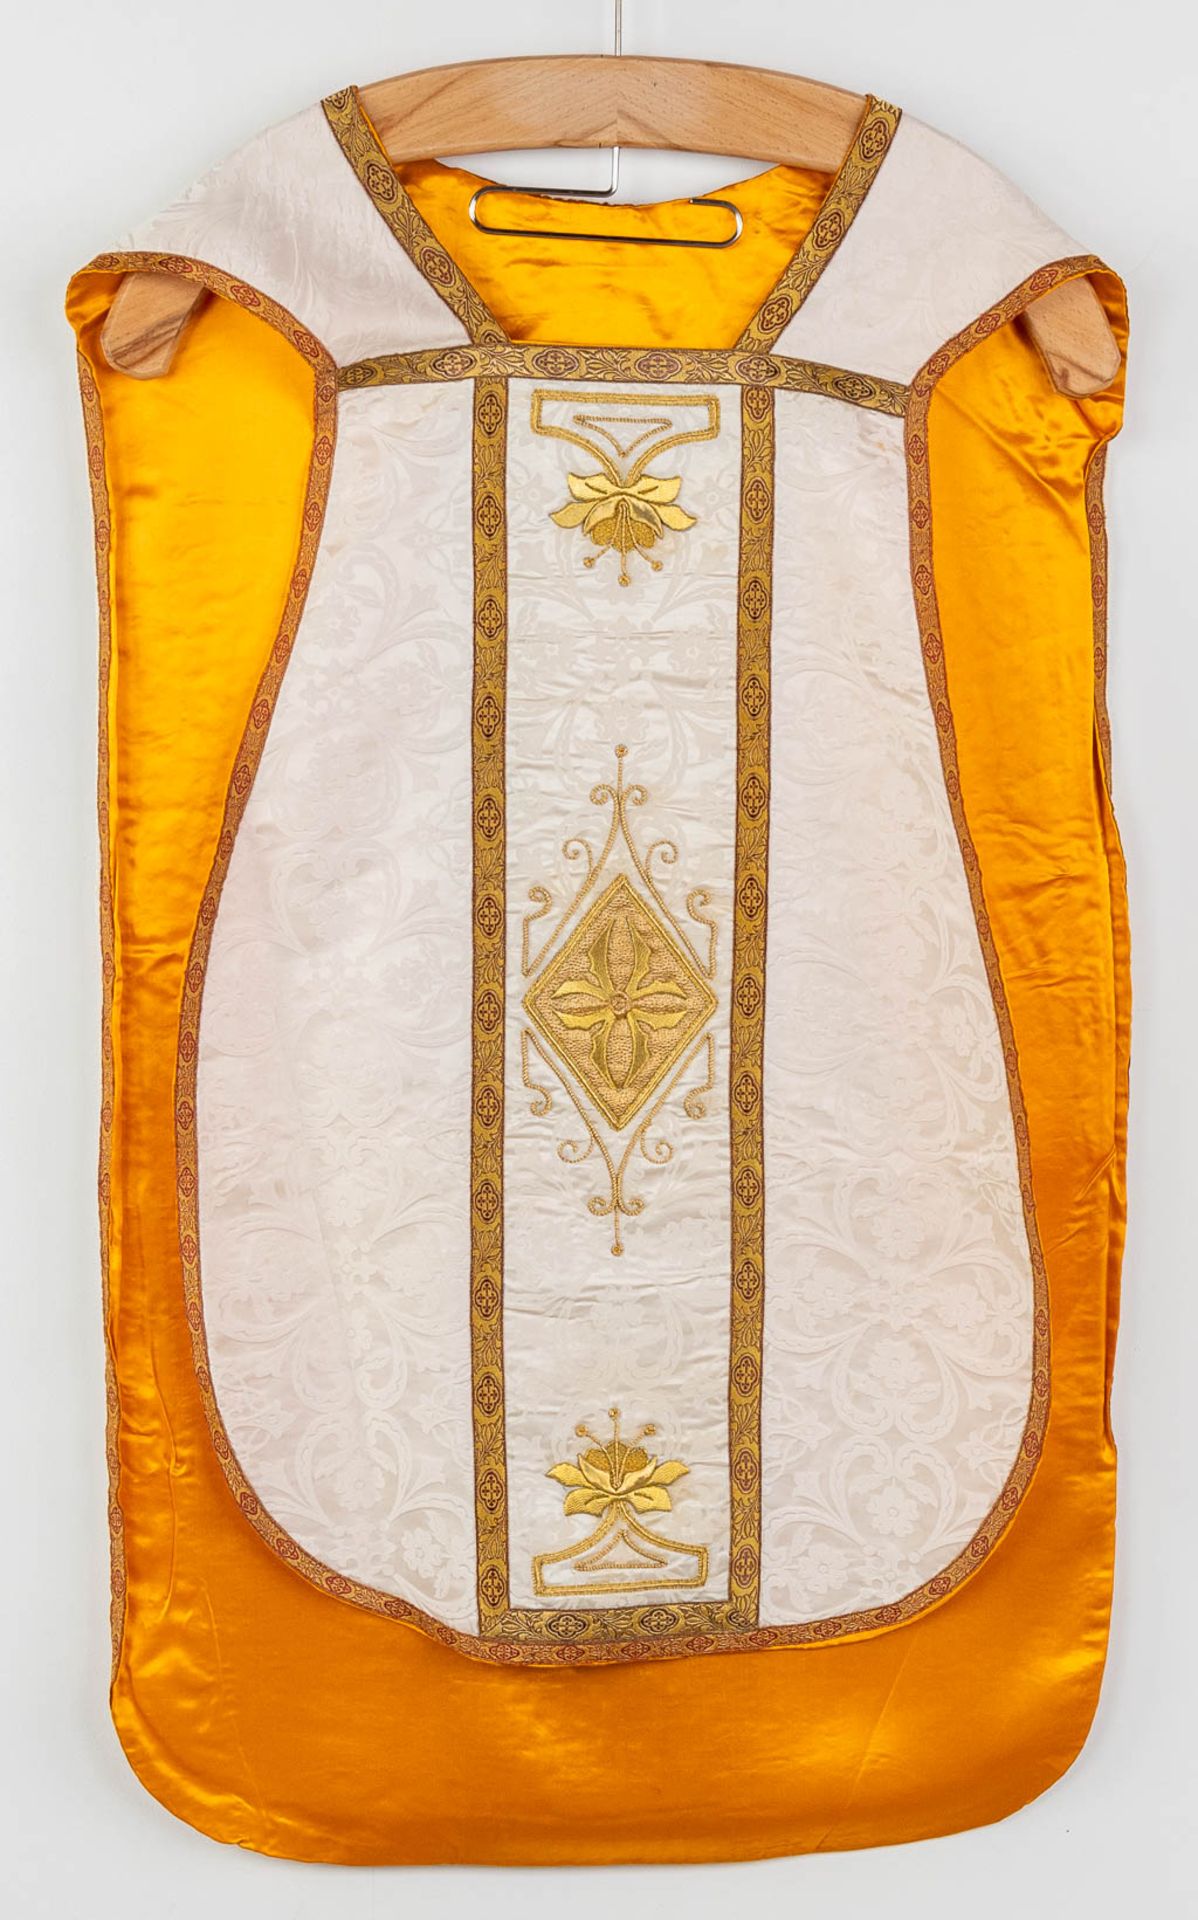 A set of Lithurgical Robes and accessories. Thick gold thread and embroideries. - Image 13 of 40